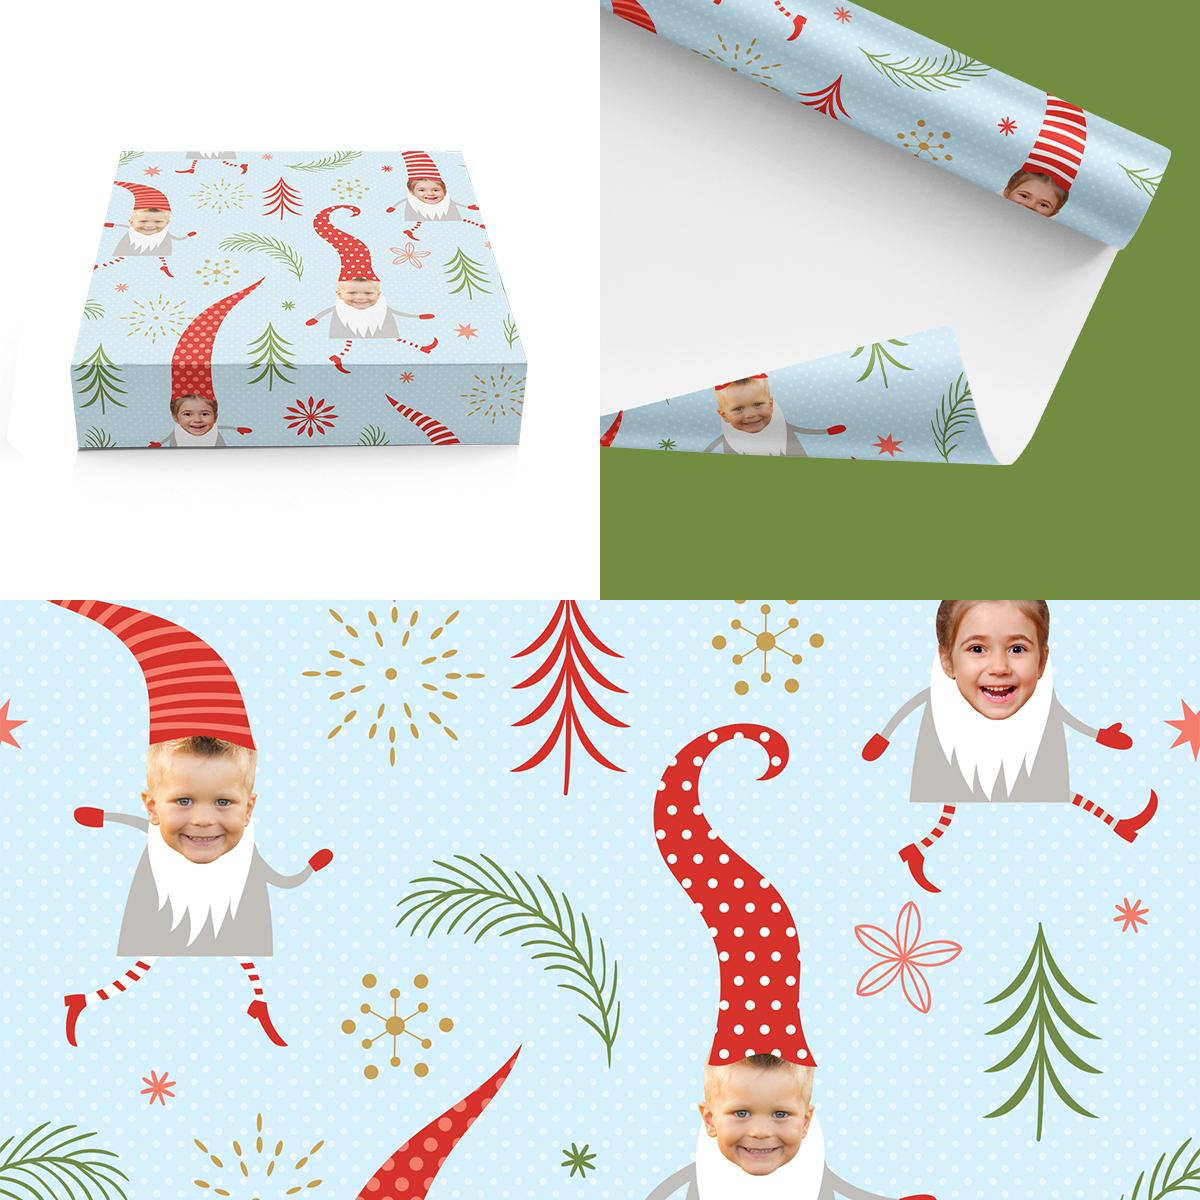 The Elf on the Shelf® Personalized Wrapping Paper, Fancy Wrapping